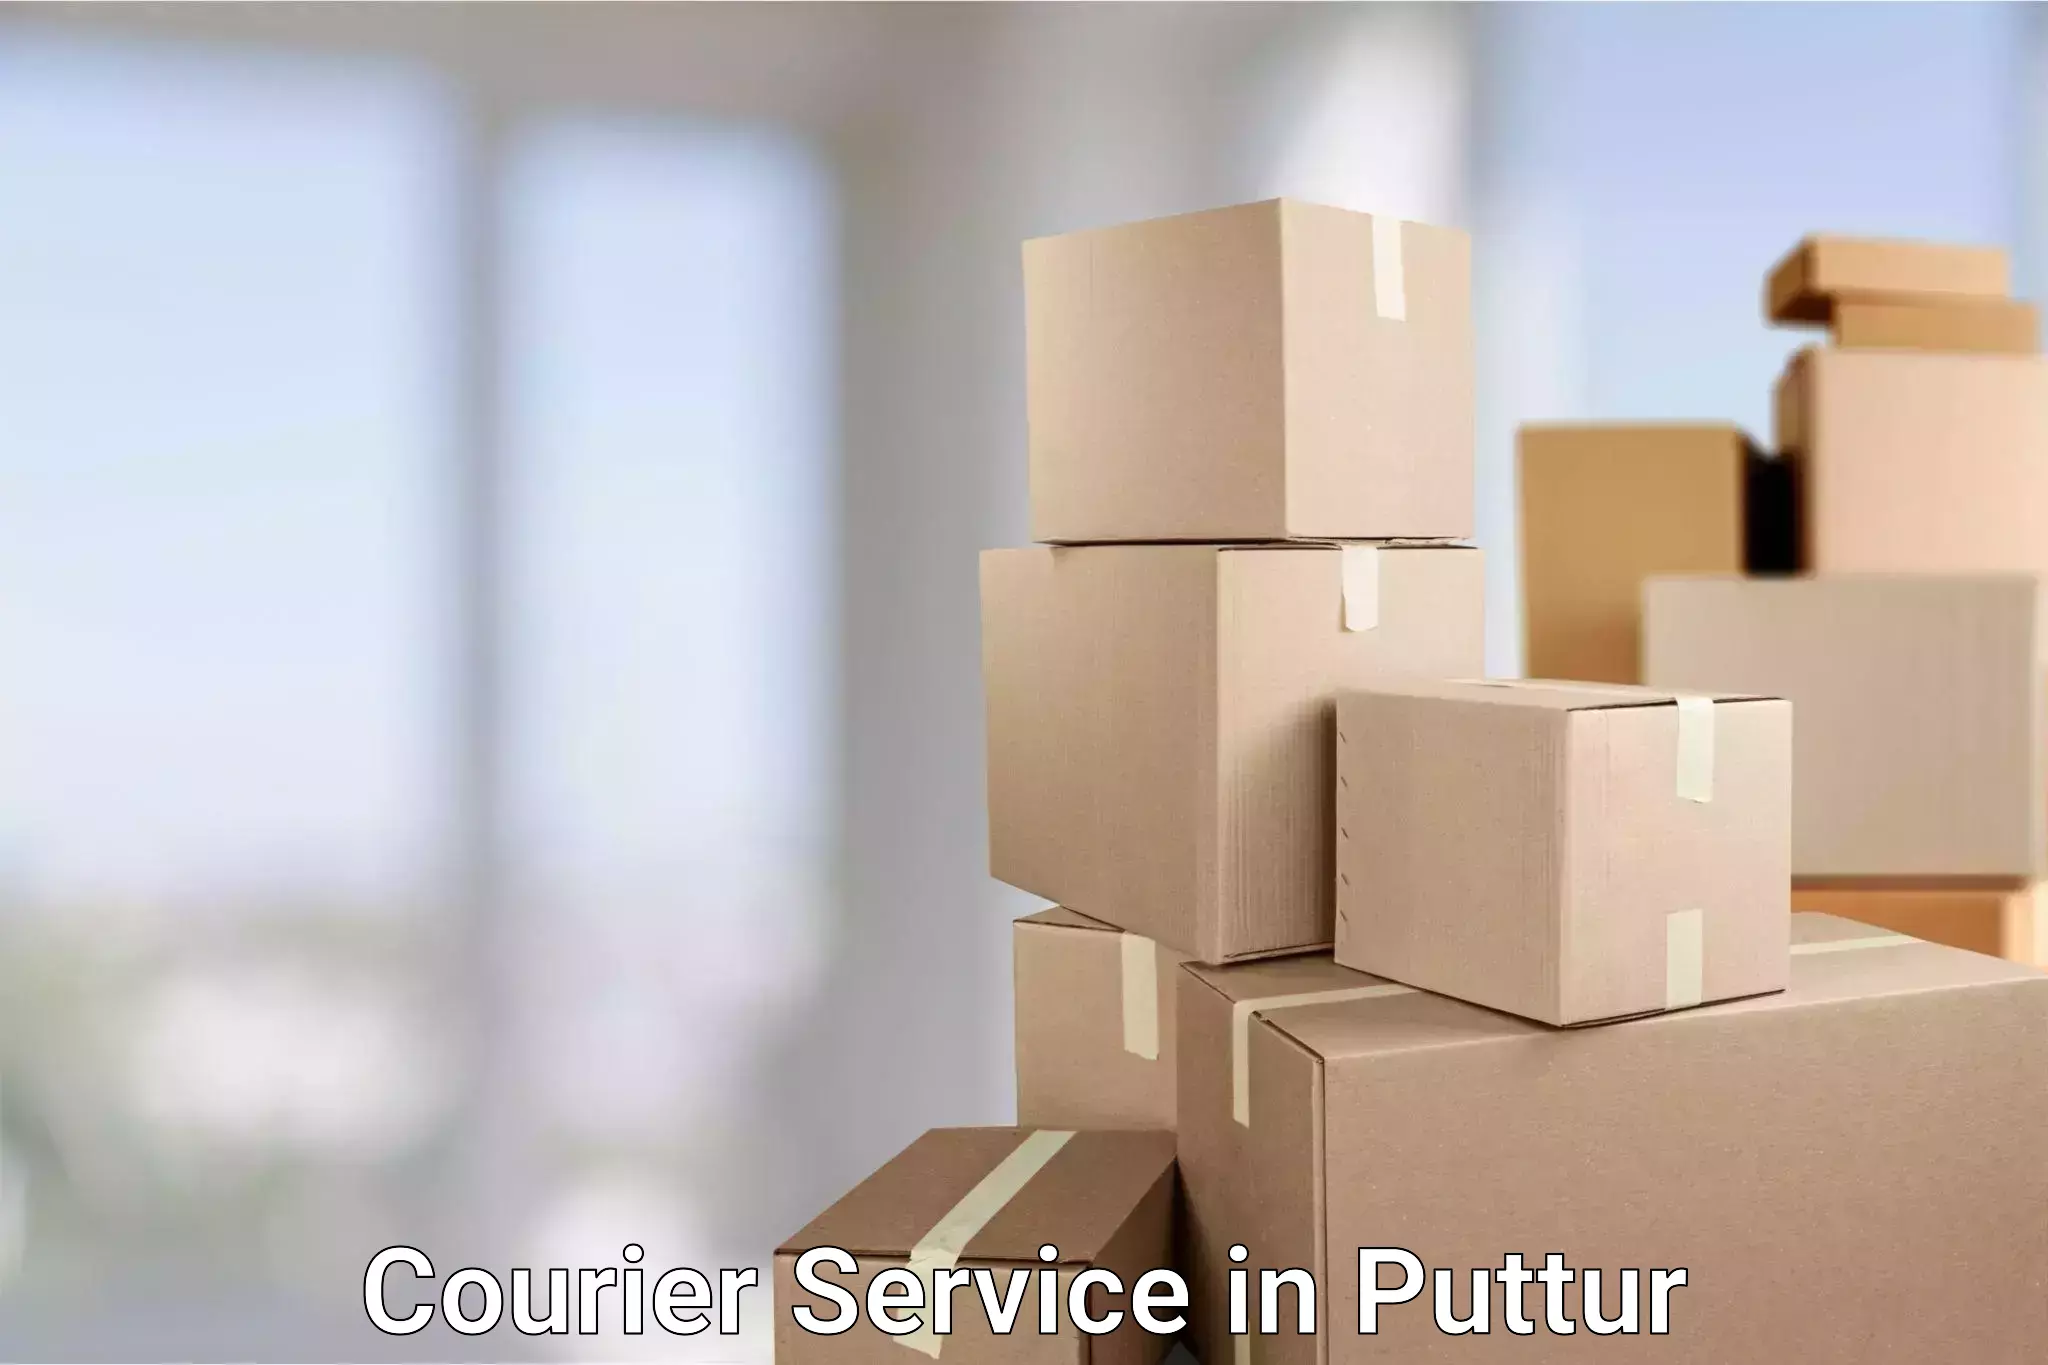 Tailored delivery services in Puttur